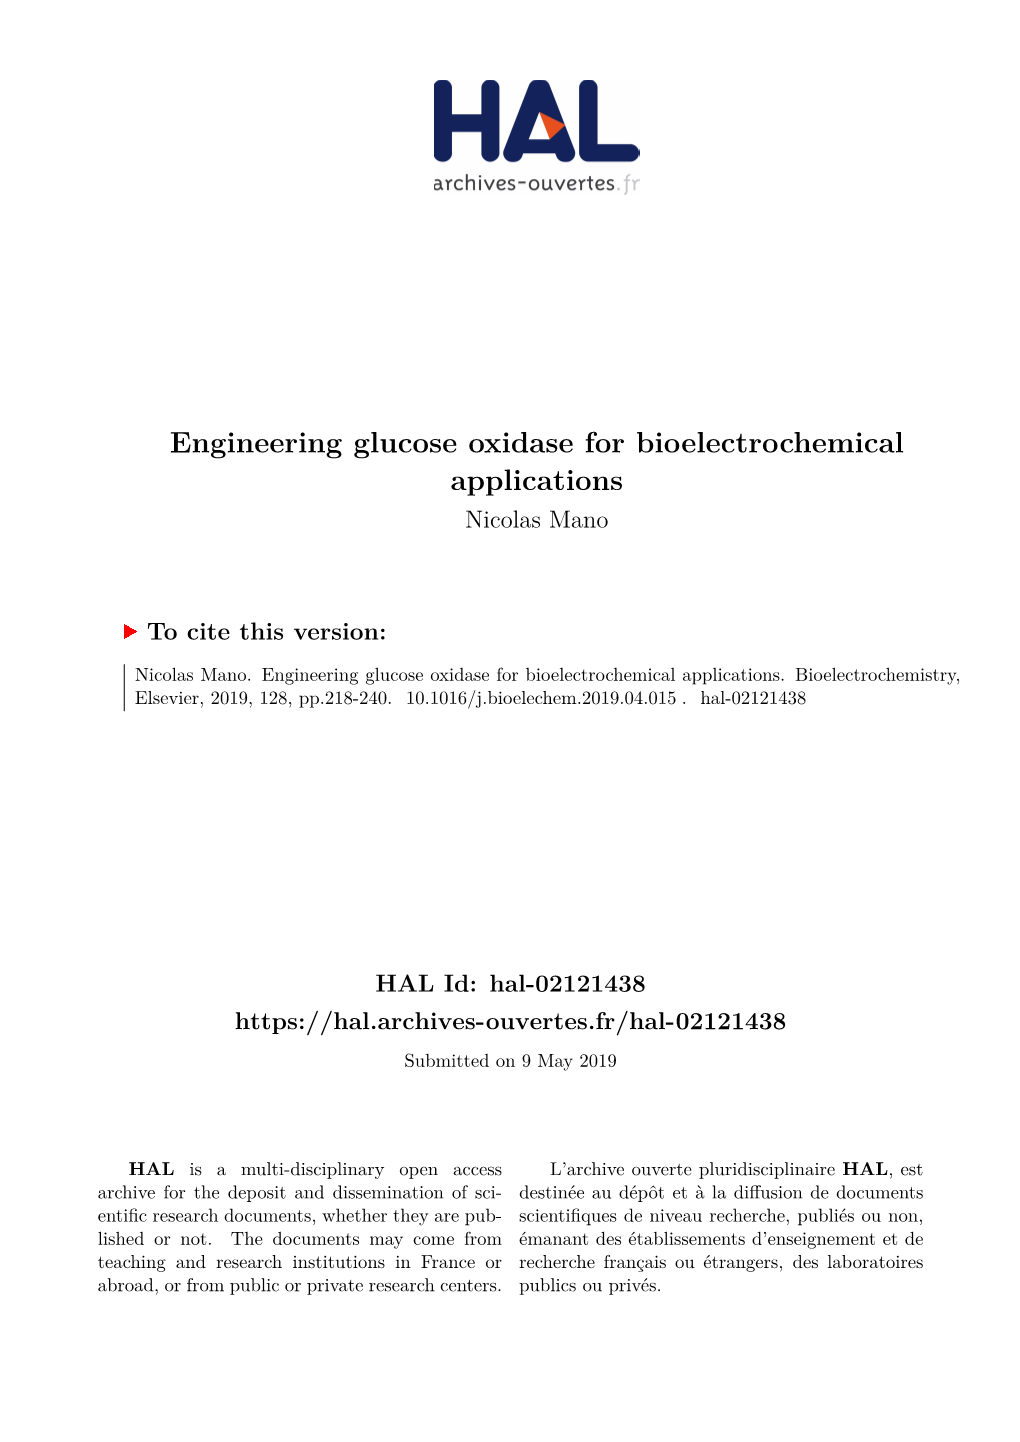 Engineering Glucose Oxidase for Bioelectrochemical Applications Nicolas Mano